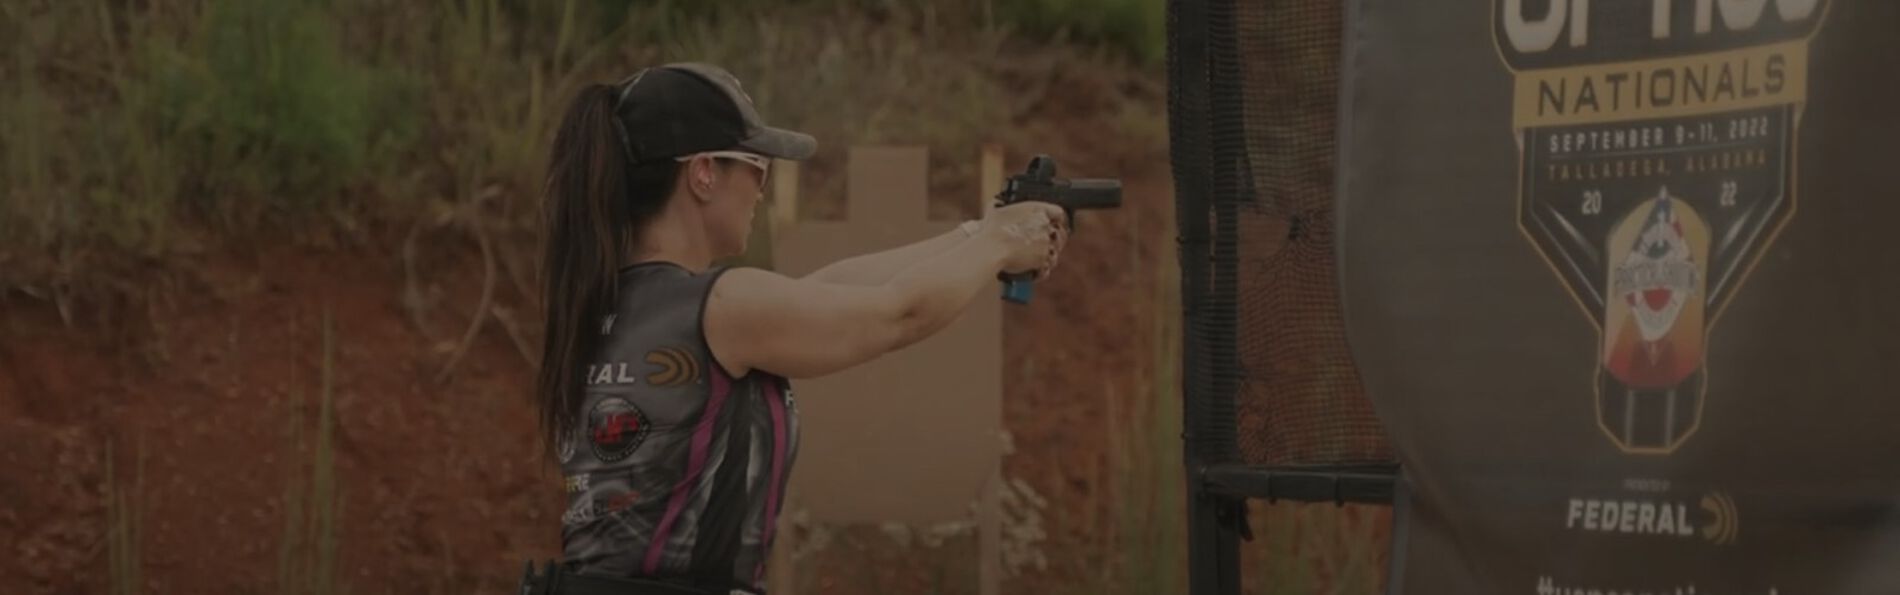 Krystal aiming his pistol with a red dot attachment at a competition